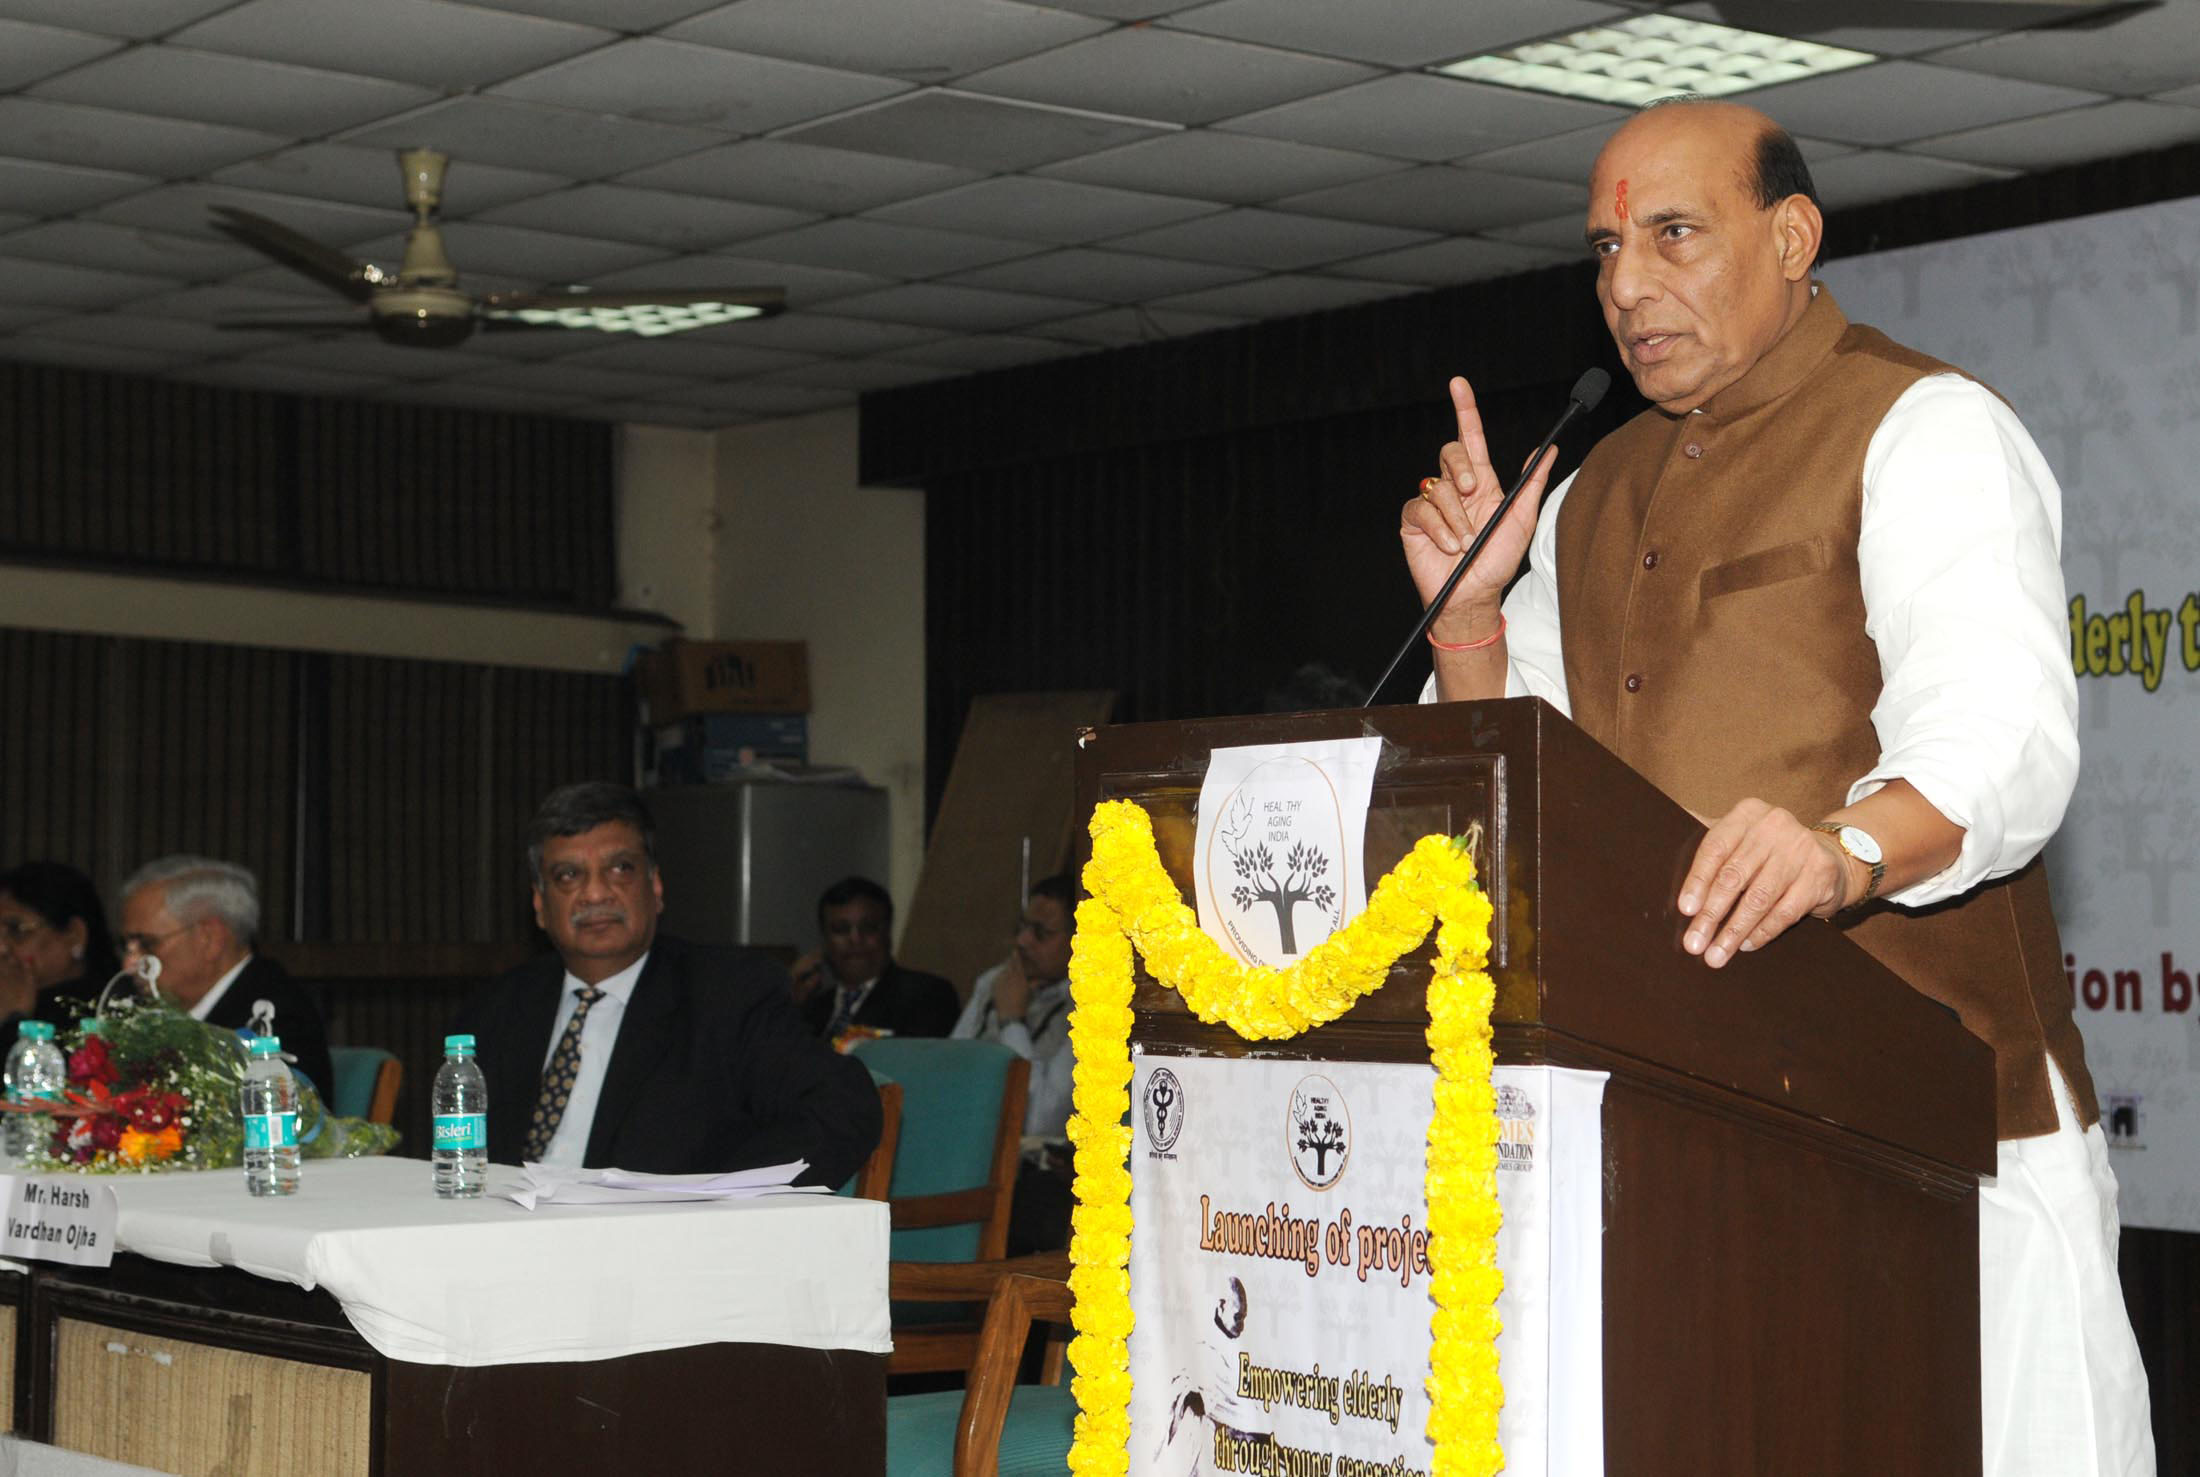 The Union Home Minister, Shri Rajnath Singh addressing at the launch of the project Empowering elderly through young generation, in New Delhi on January 17, 2016.